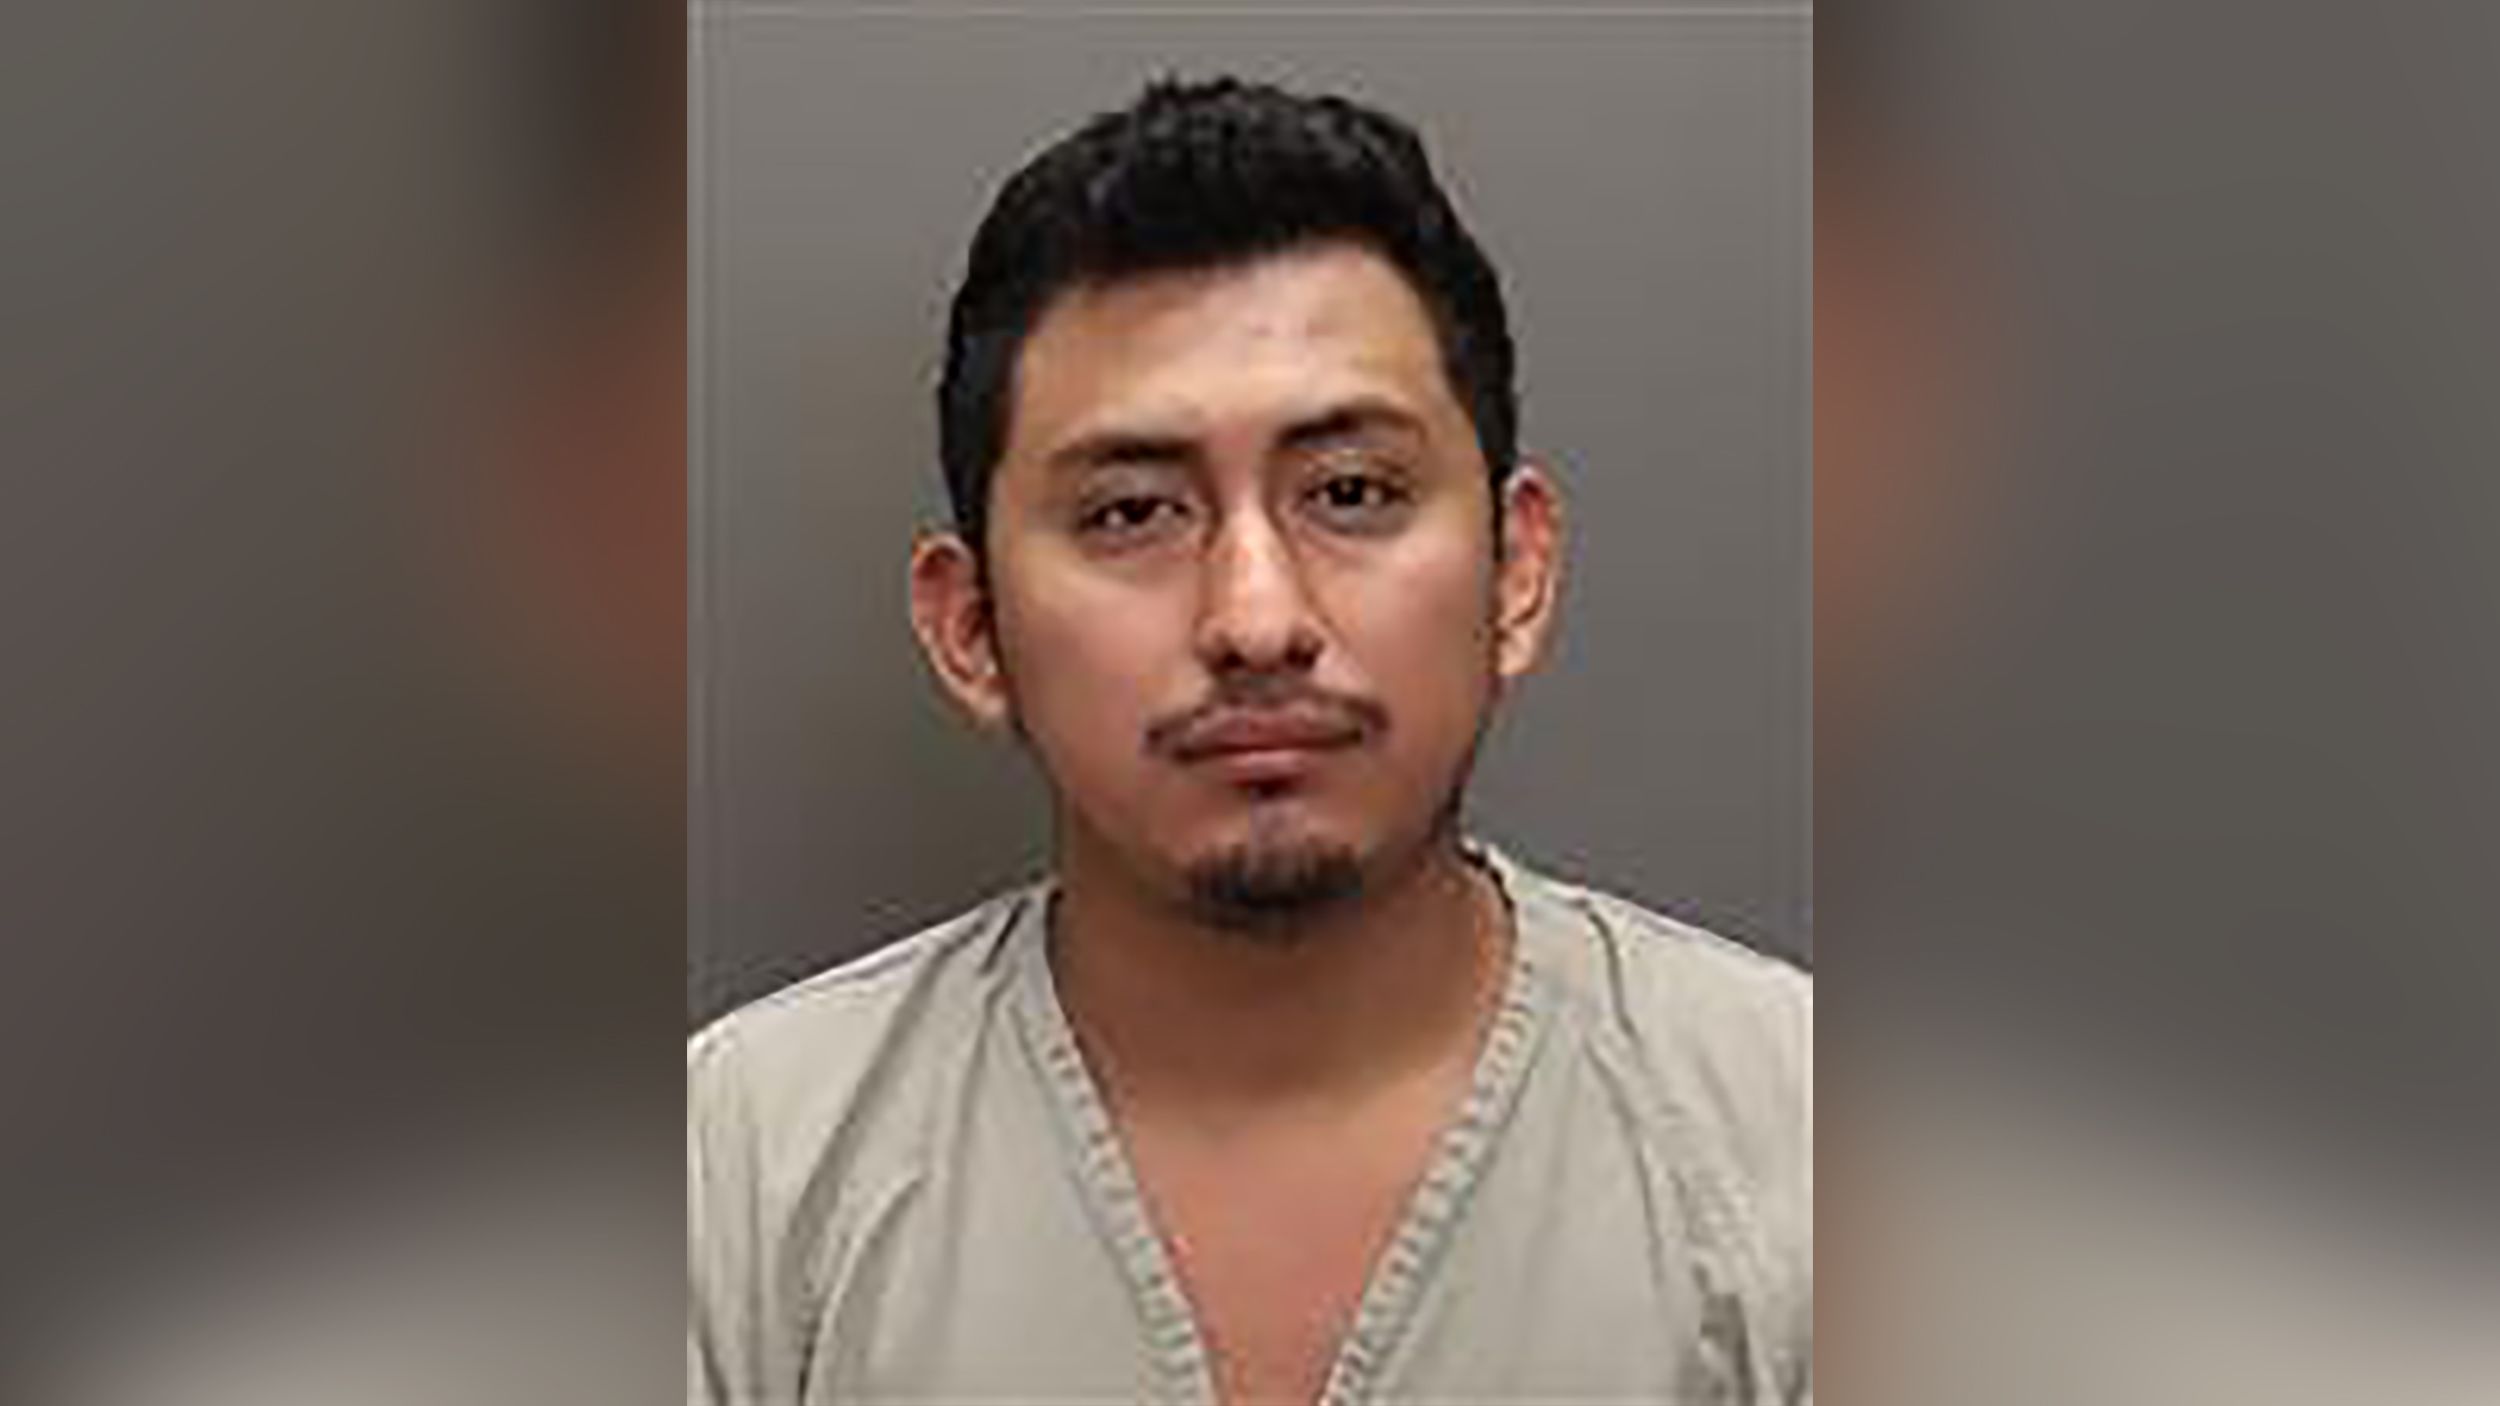 Www Sex Rape Old Manvideo Com - Gerson Fuentes was charged in the rape of a 10-year-old Ohio girl who  traveled to Indiana for an abortion | CNN